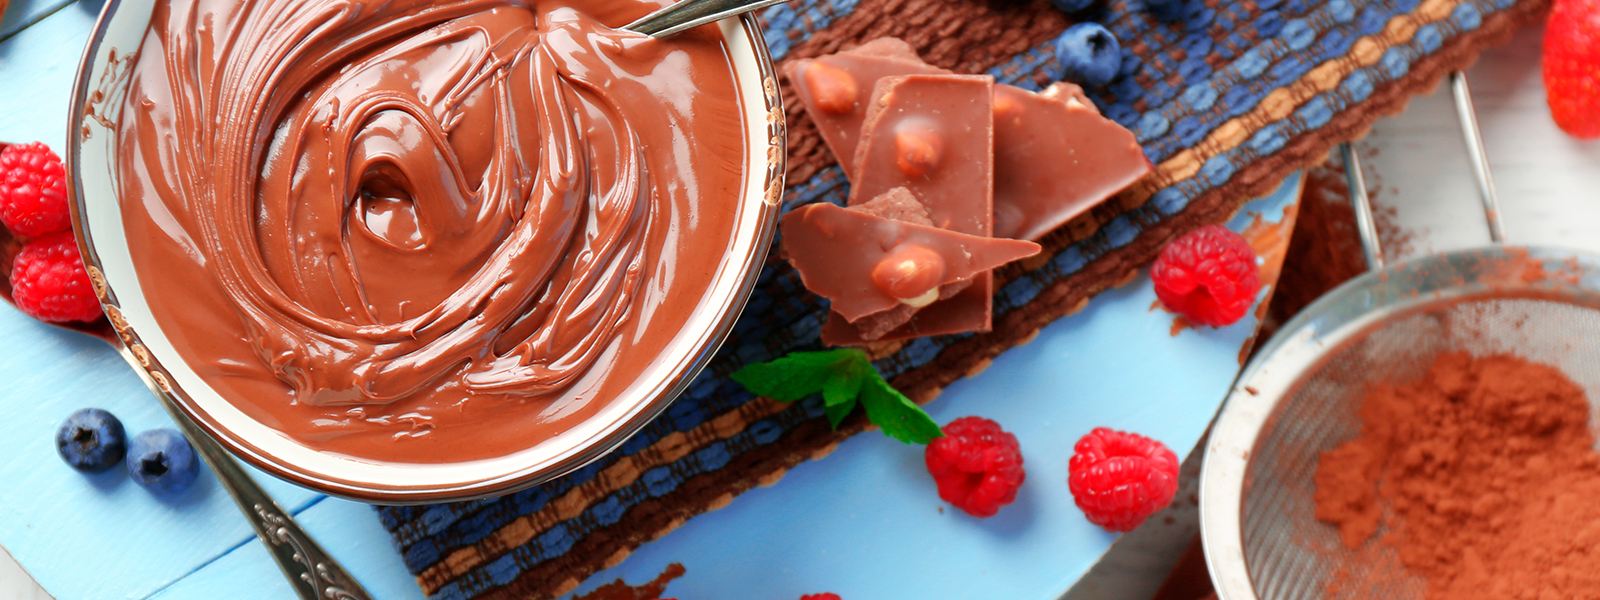 banner-carino-ingredients-toppings-fillings-chocolate-inclusions-syrup-sauce